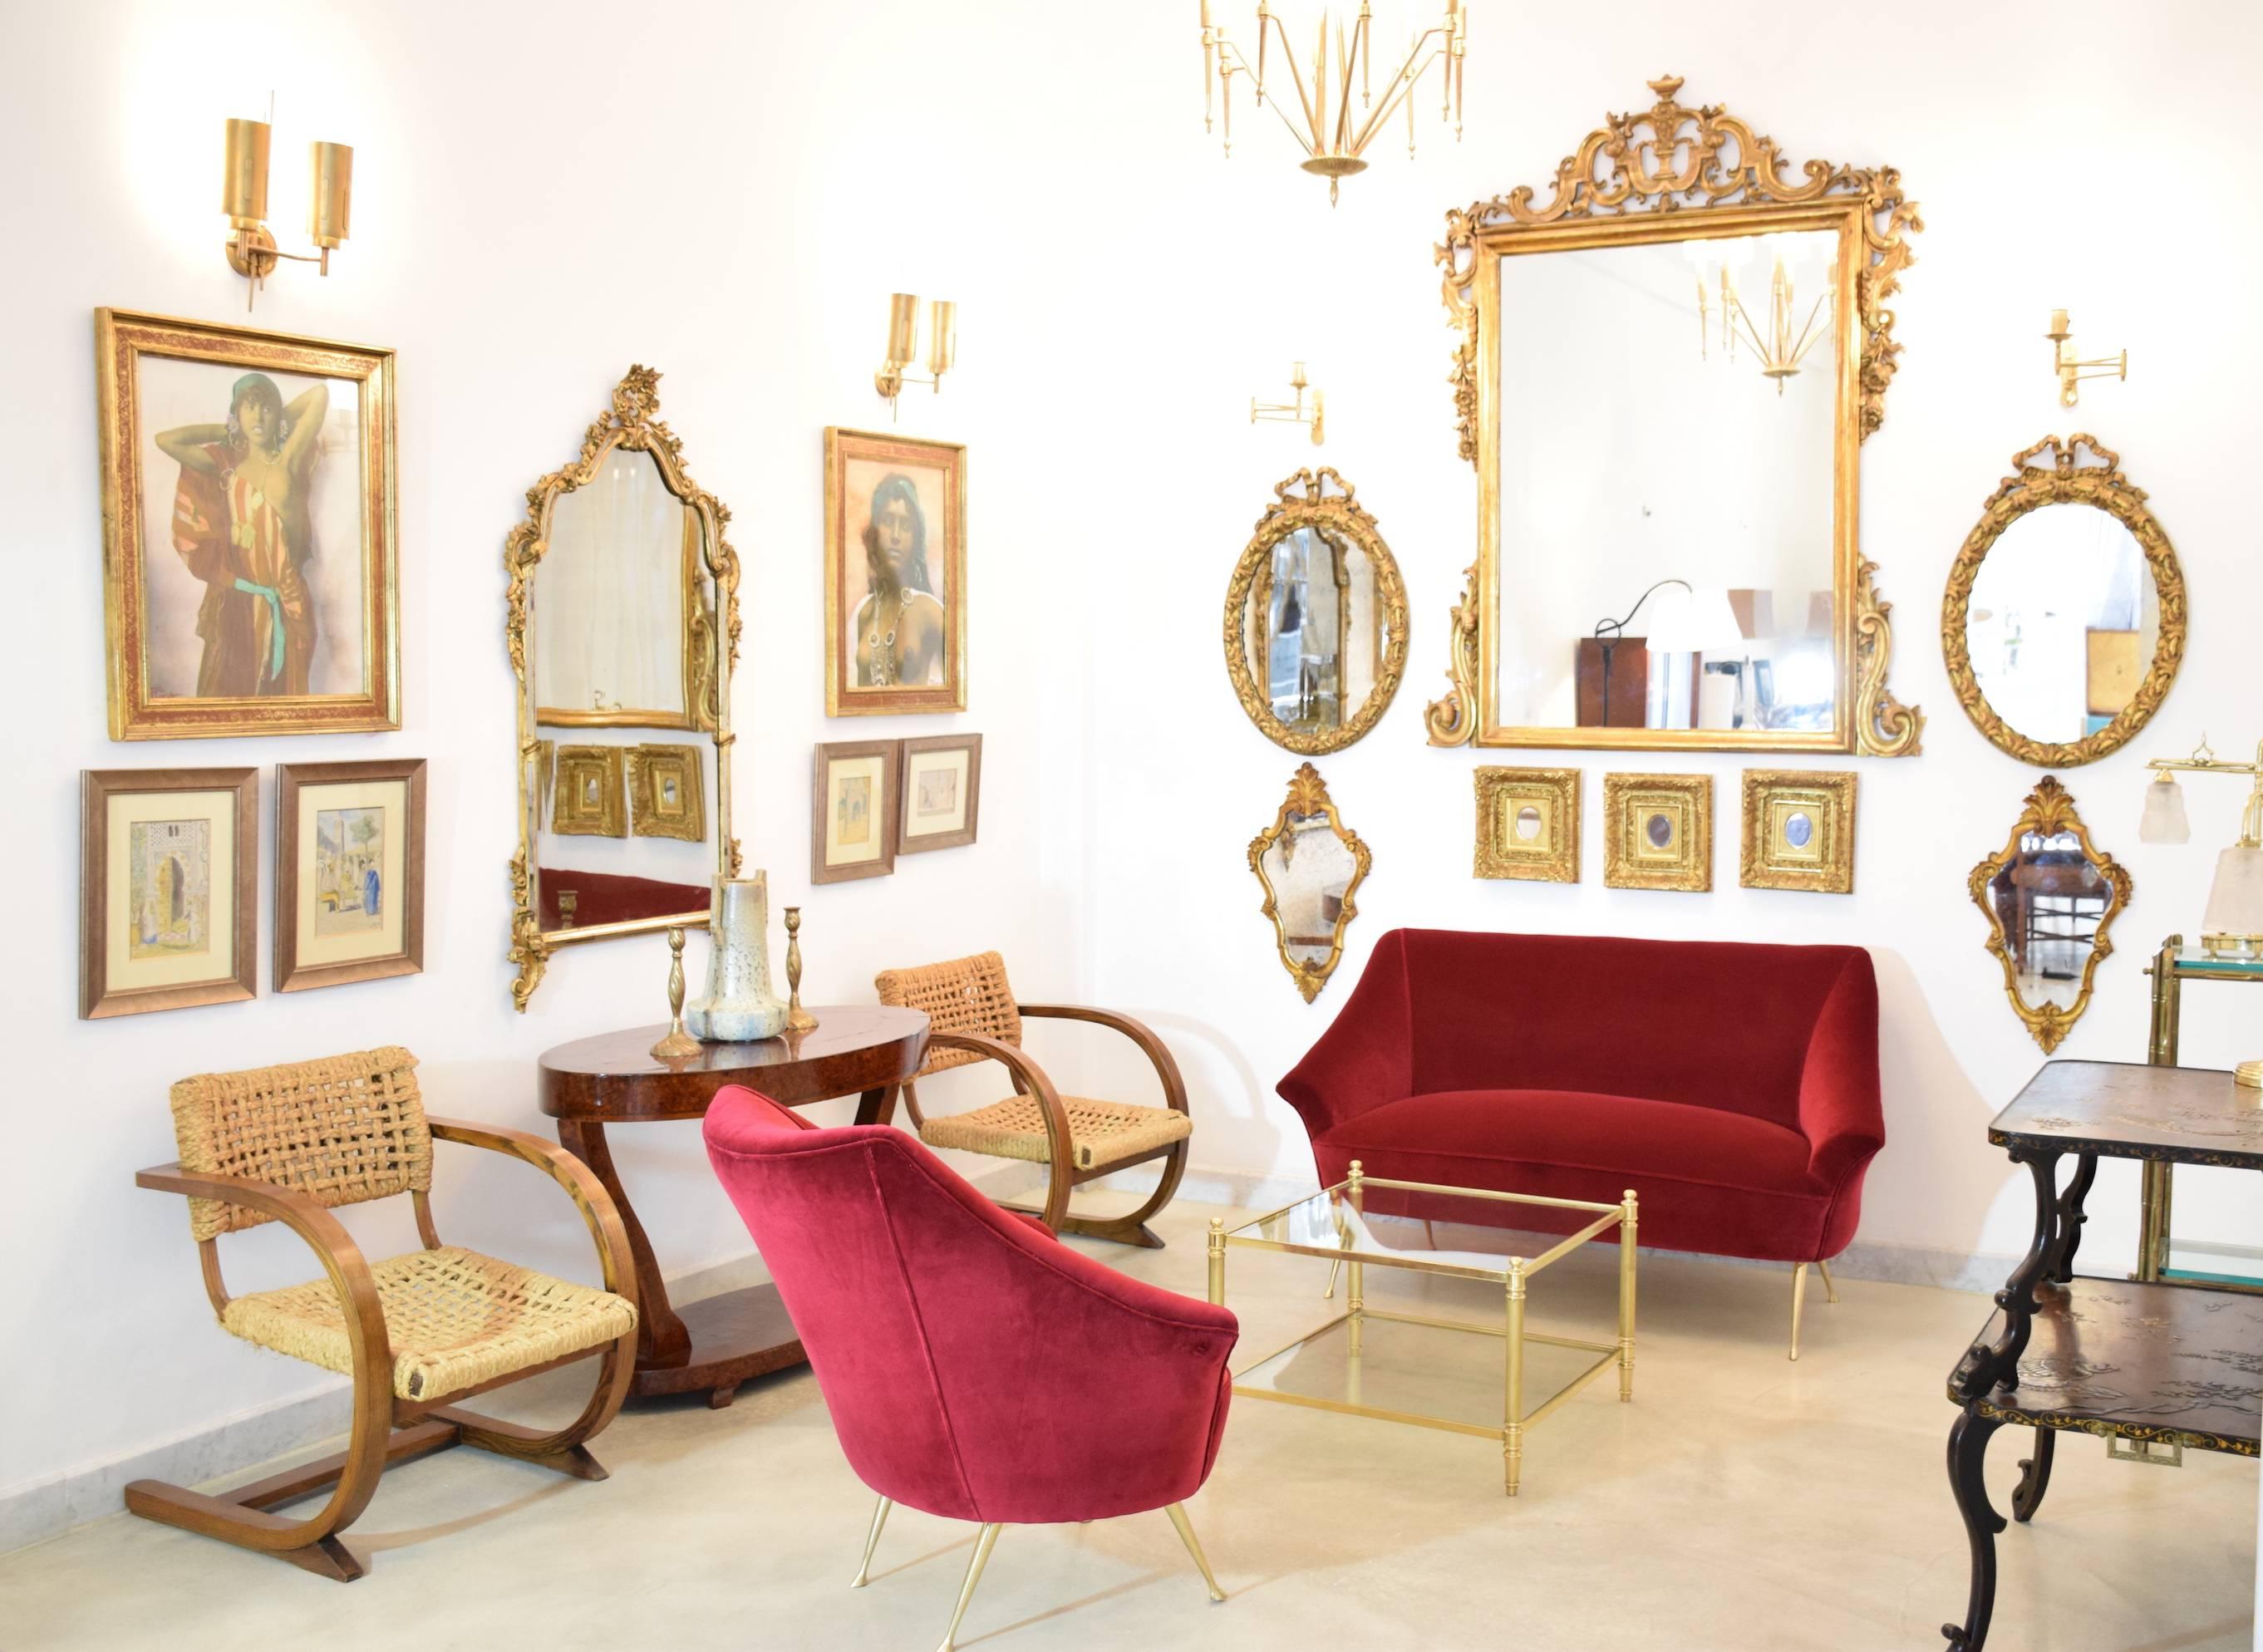 A vibrant 1950's Italian brass-legged, curved two-seater sofa and armchair or lounge chair set. All meticulously fully restored by our artisans with one of the highest quality french upholstery makers, Lelièvre Paris, in a lush red velvet. 

The